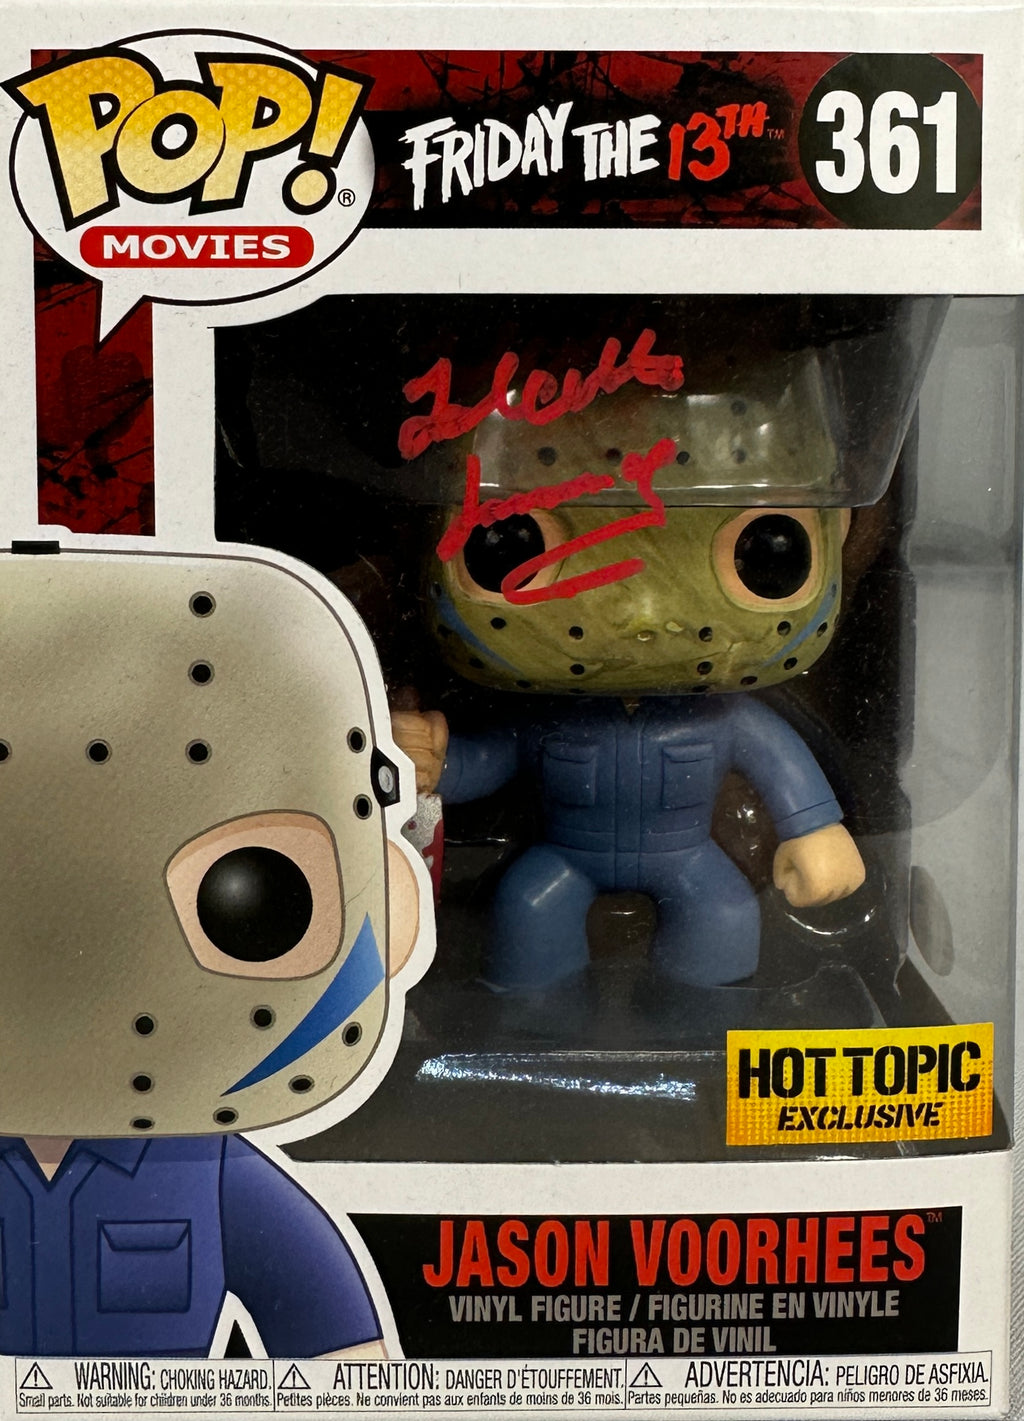 Ted White autographed signed inscribed Funko #361 Friday The 13th PSA COA Jason